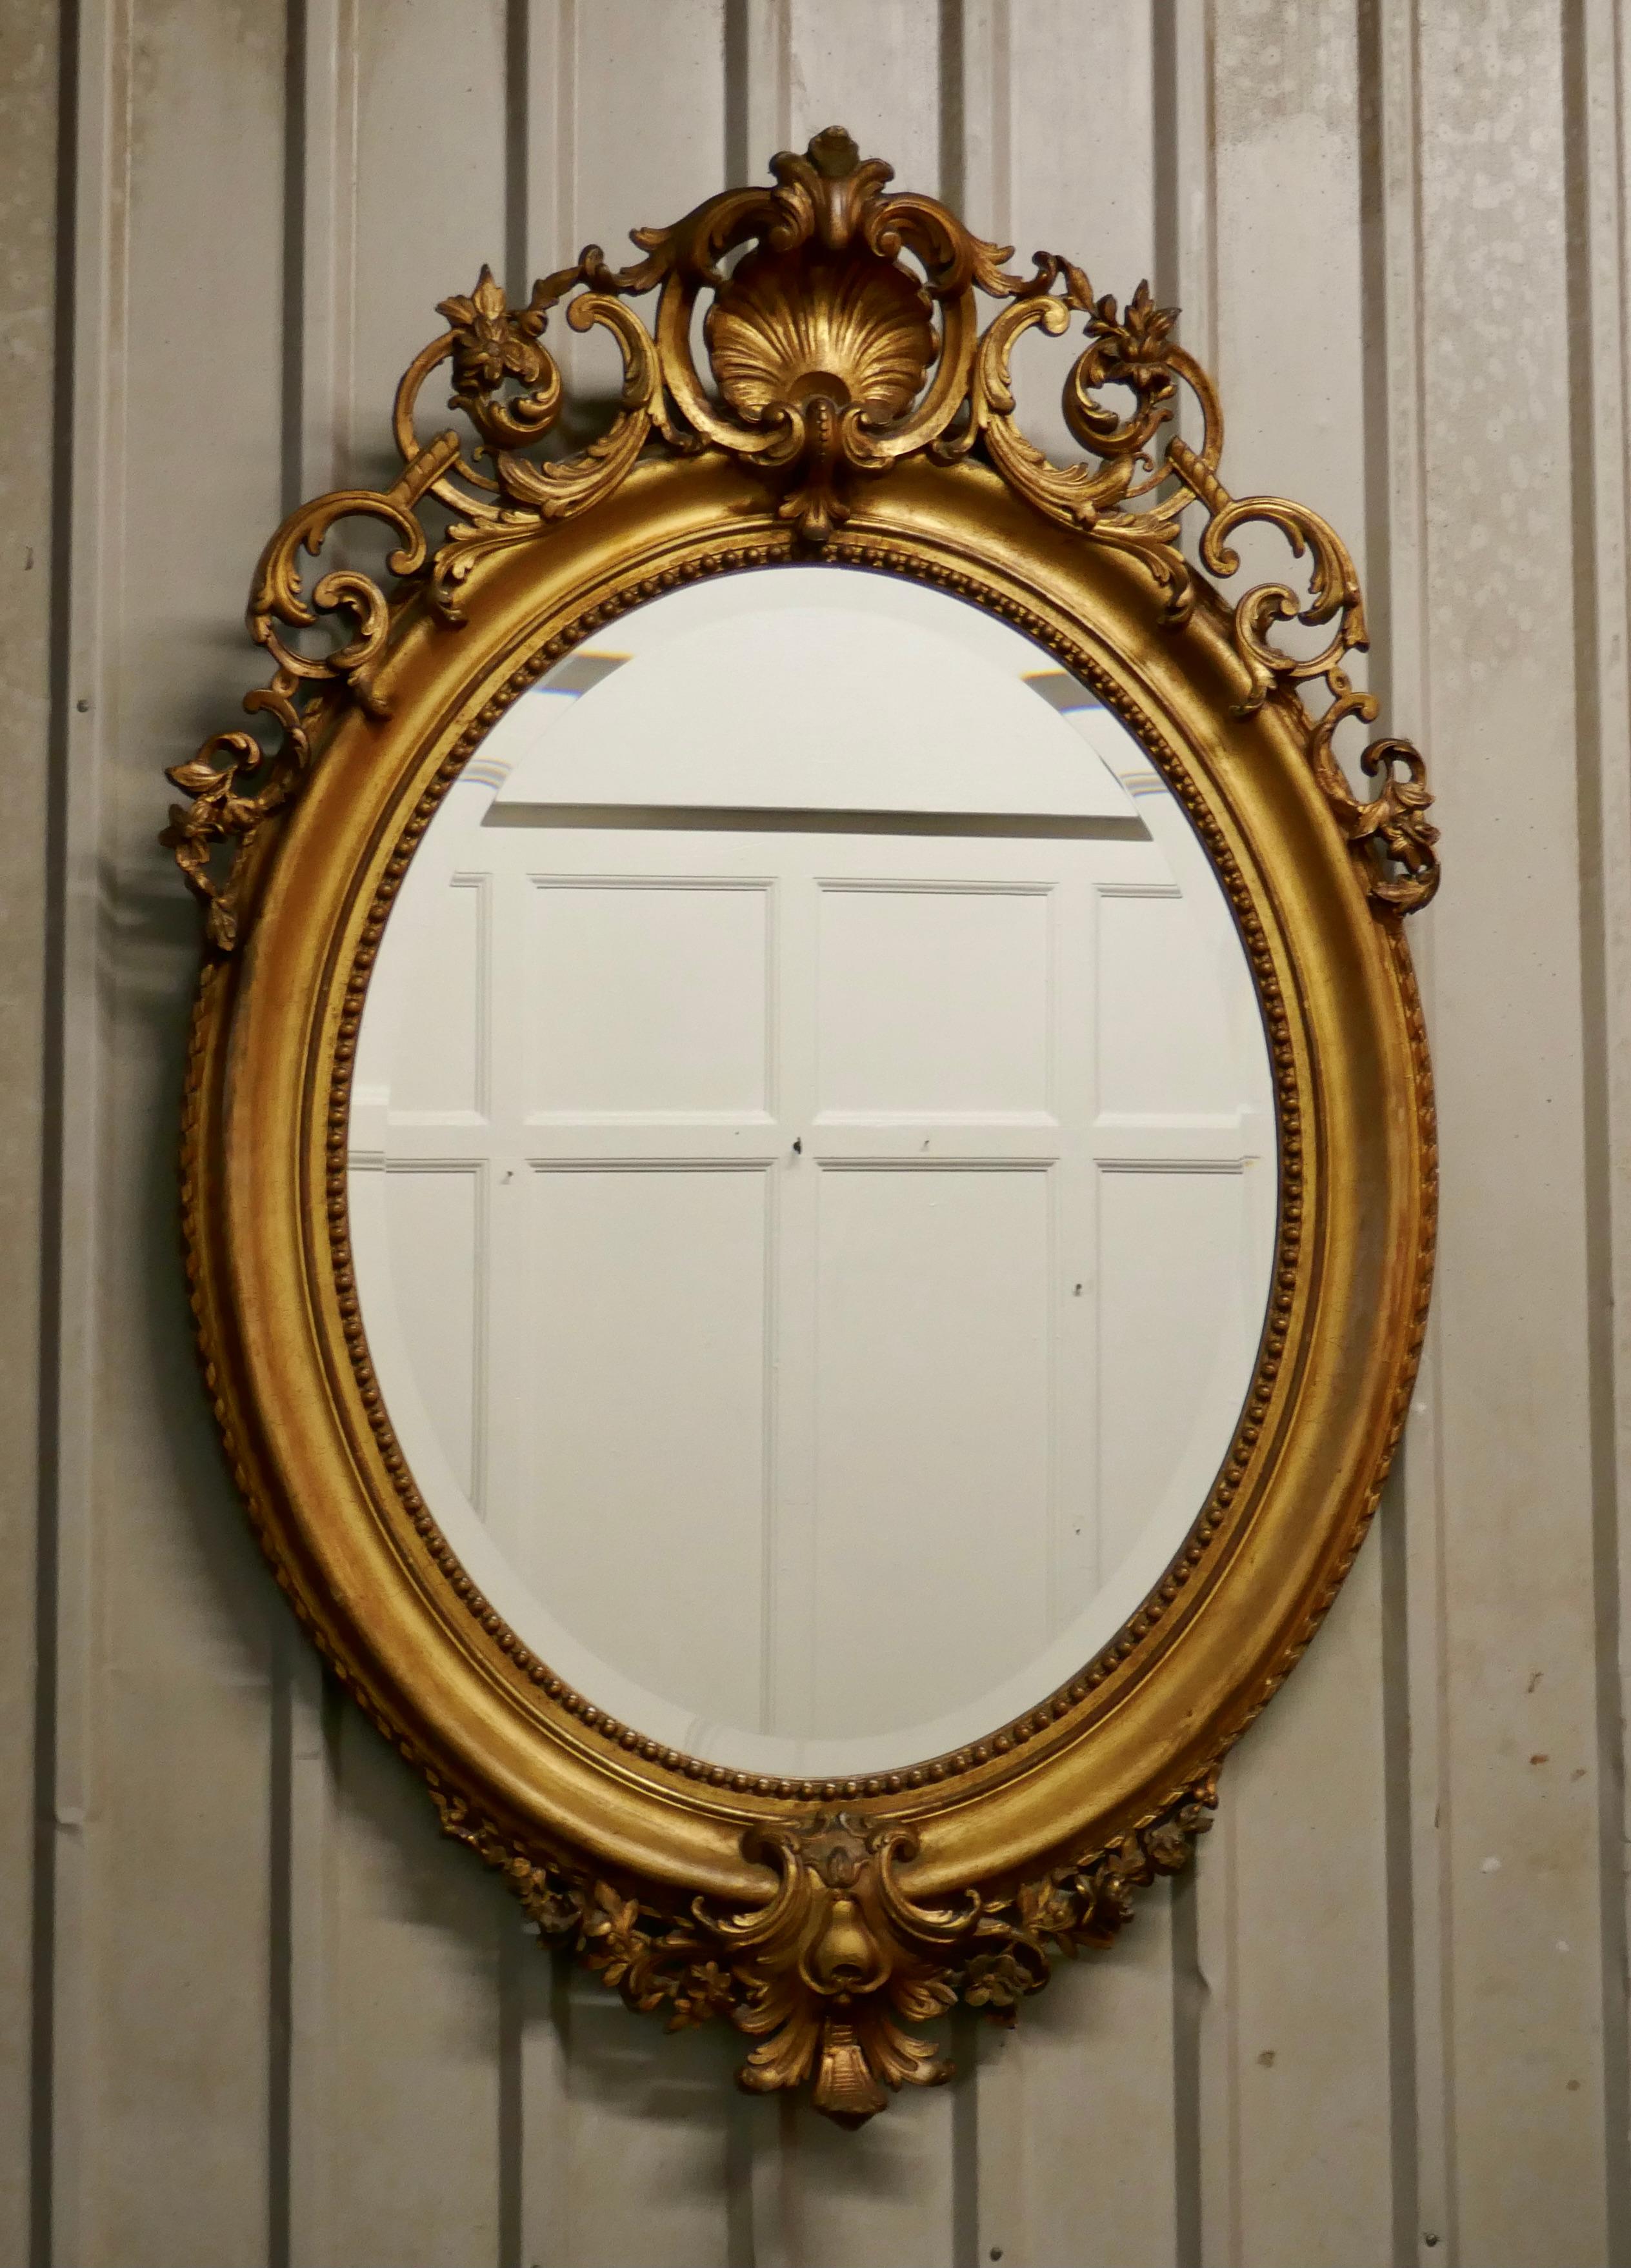 A very large French Rococo oval gilt wall mirror

The mirror has an exquisite gilt frame in the Rococo style, it is elaborately decorated with shells, swags and leaves with a neat rope edge
The large age darkened oval frame is made in gesso and